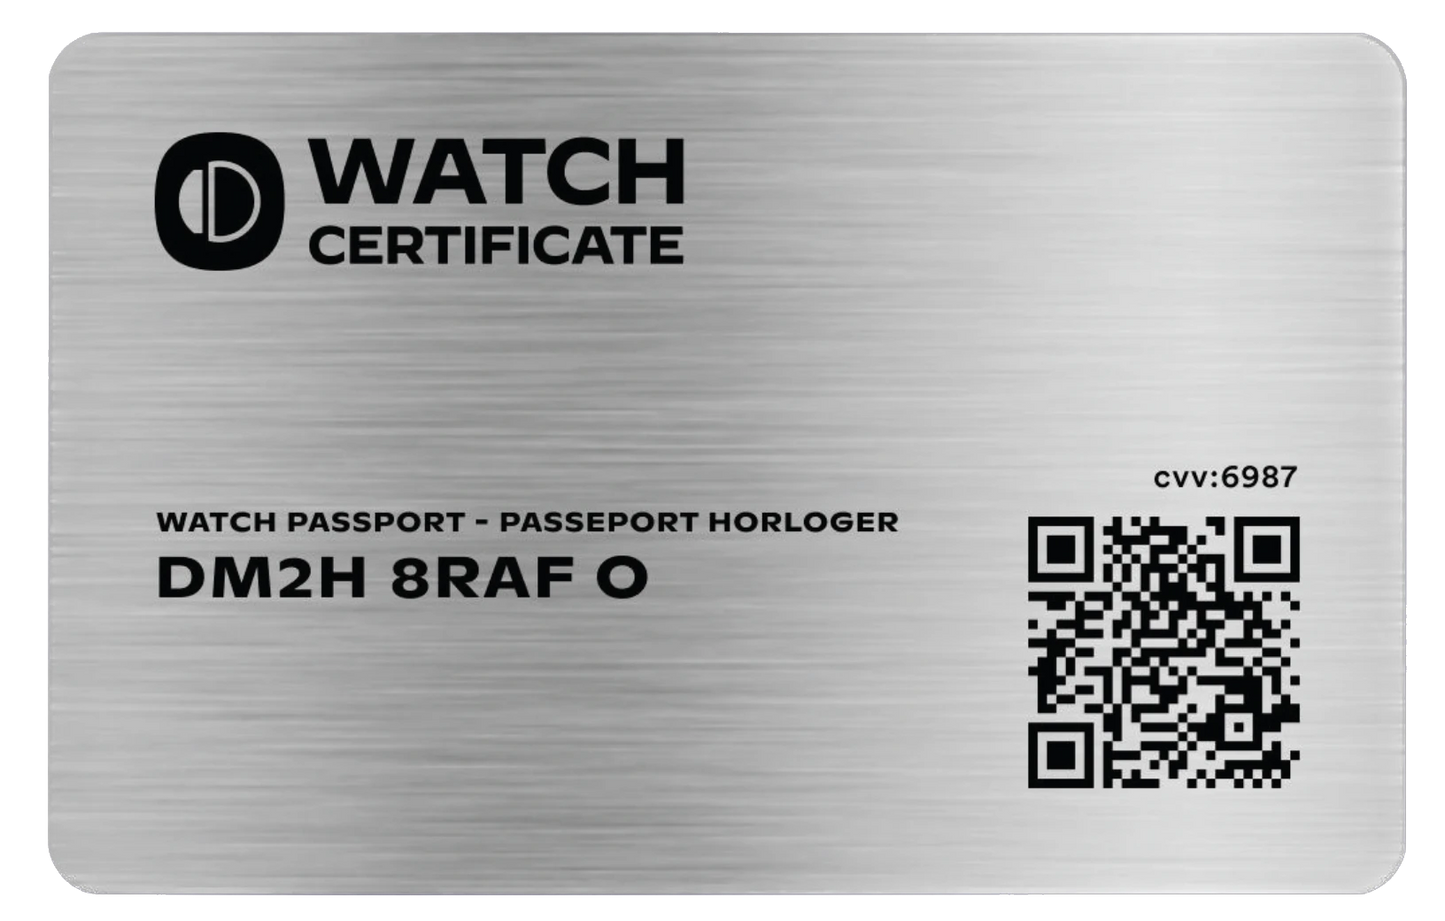 Watch Certificate - The passport for watches